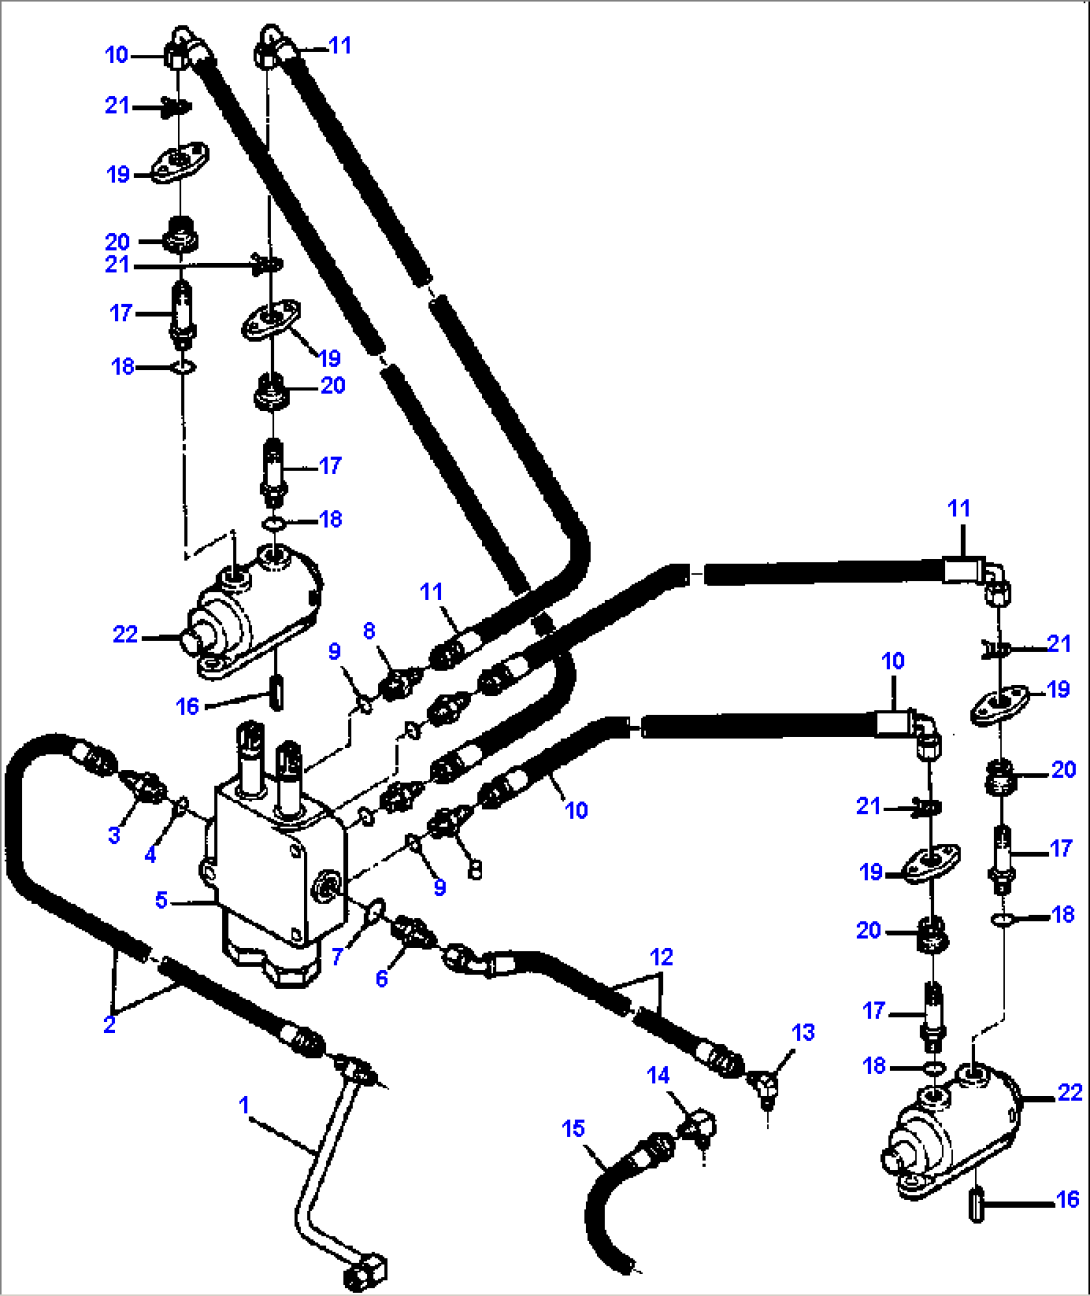 DRIVE TRAIN PIPING - STEERING LINES